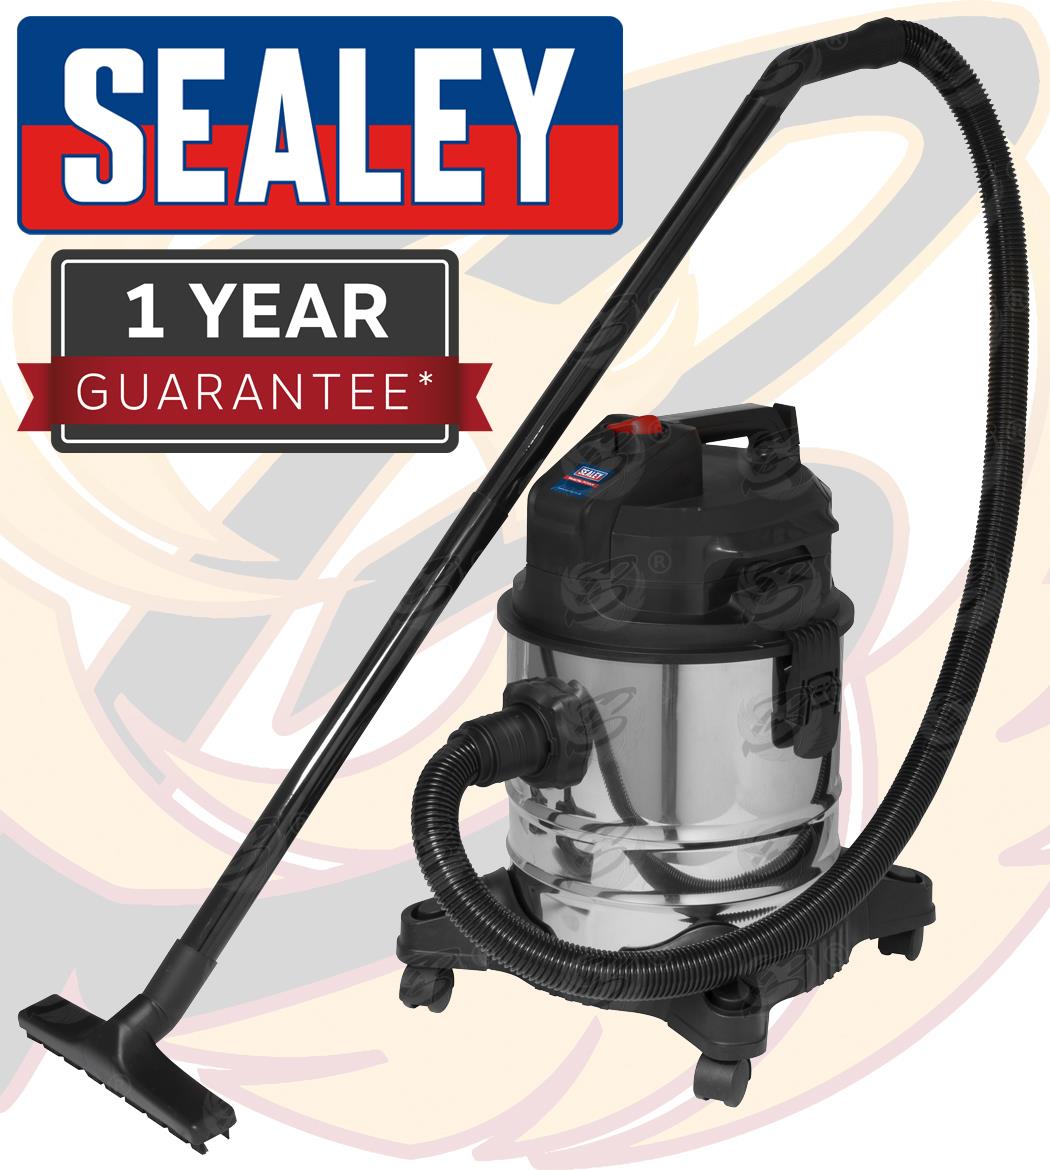 SEALEY WET AND DRY VACUUM CLEANER 20L 1000W / 240V WATER DIRT CARPET WASHER